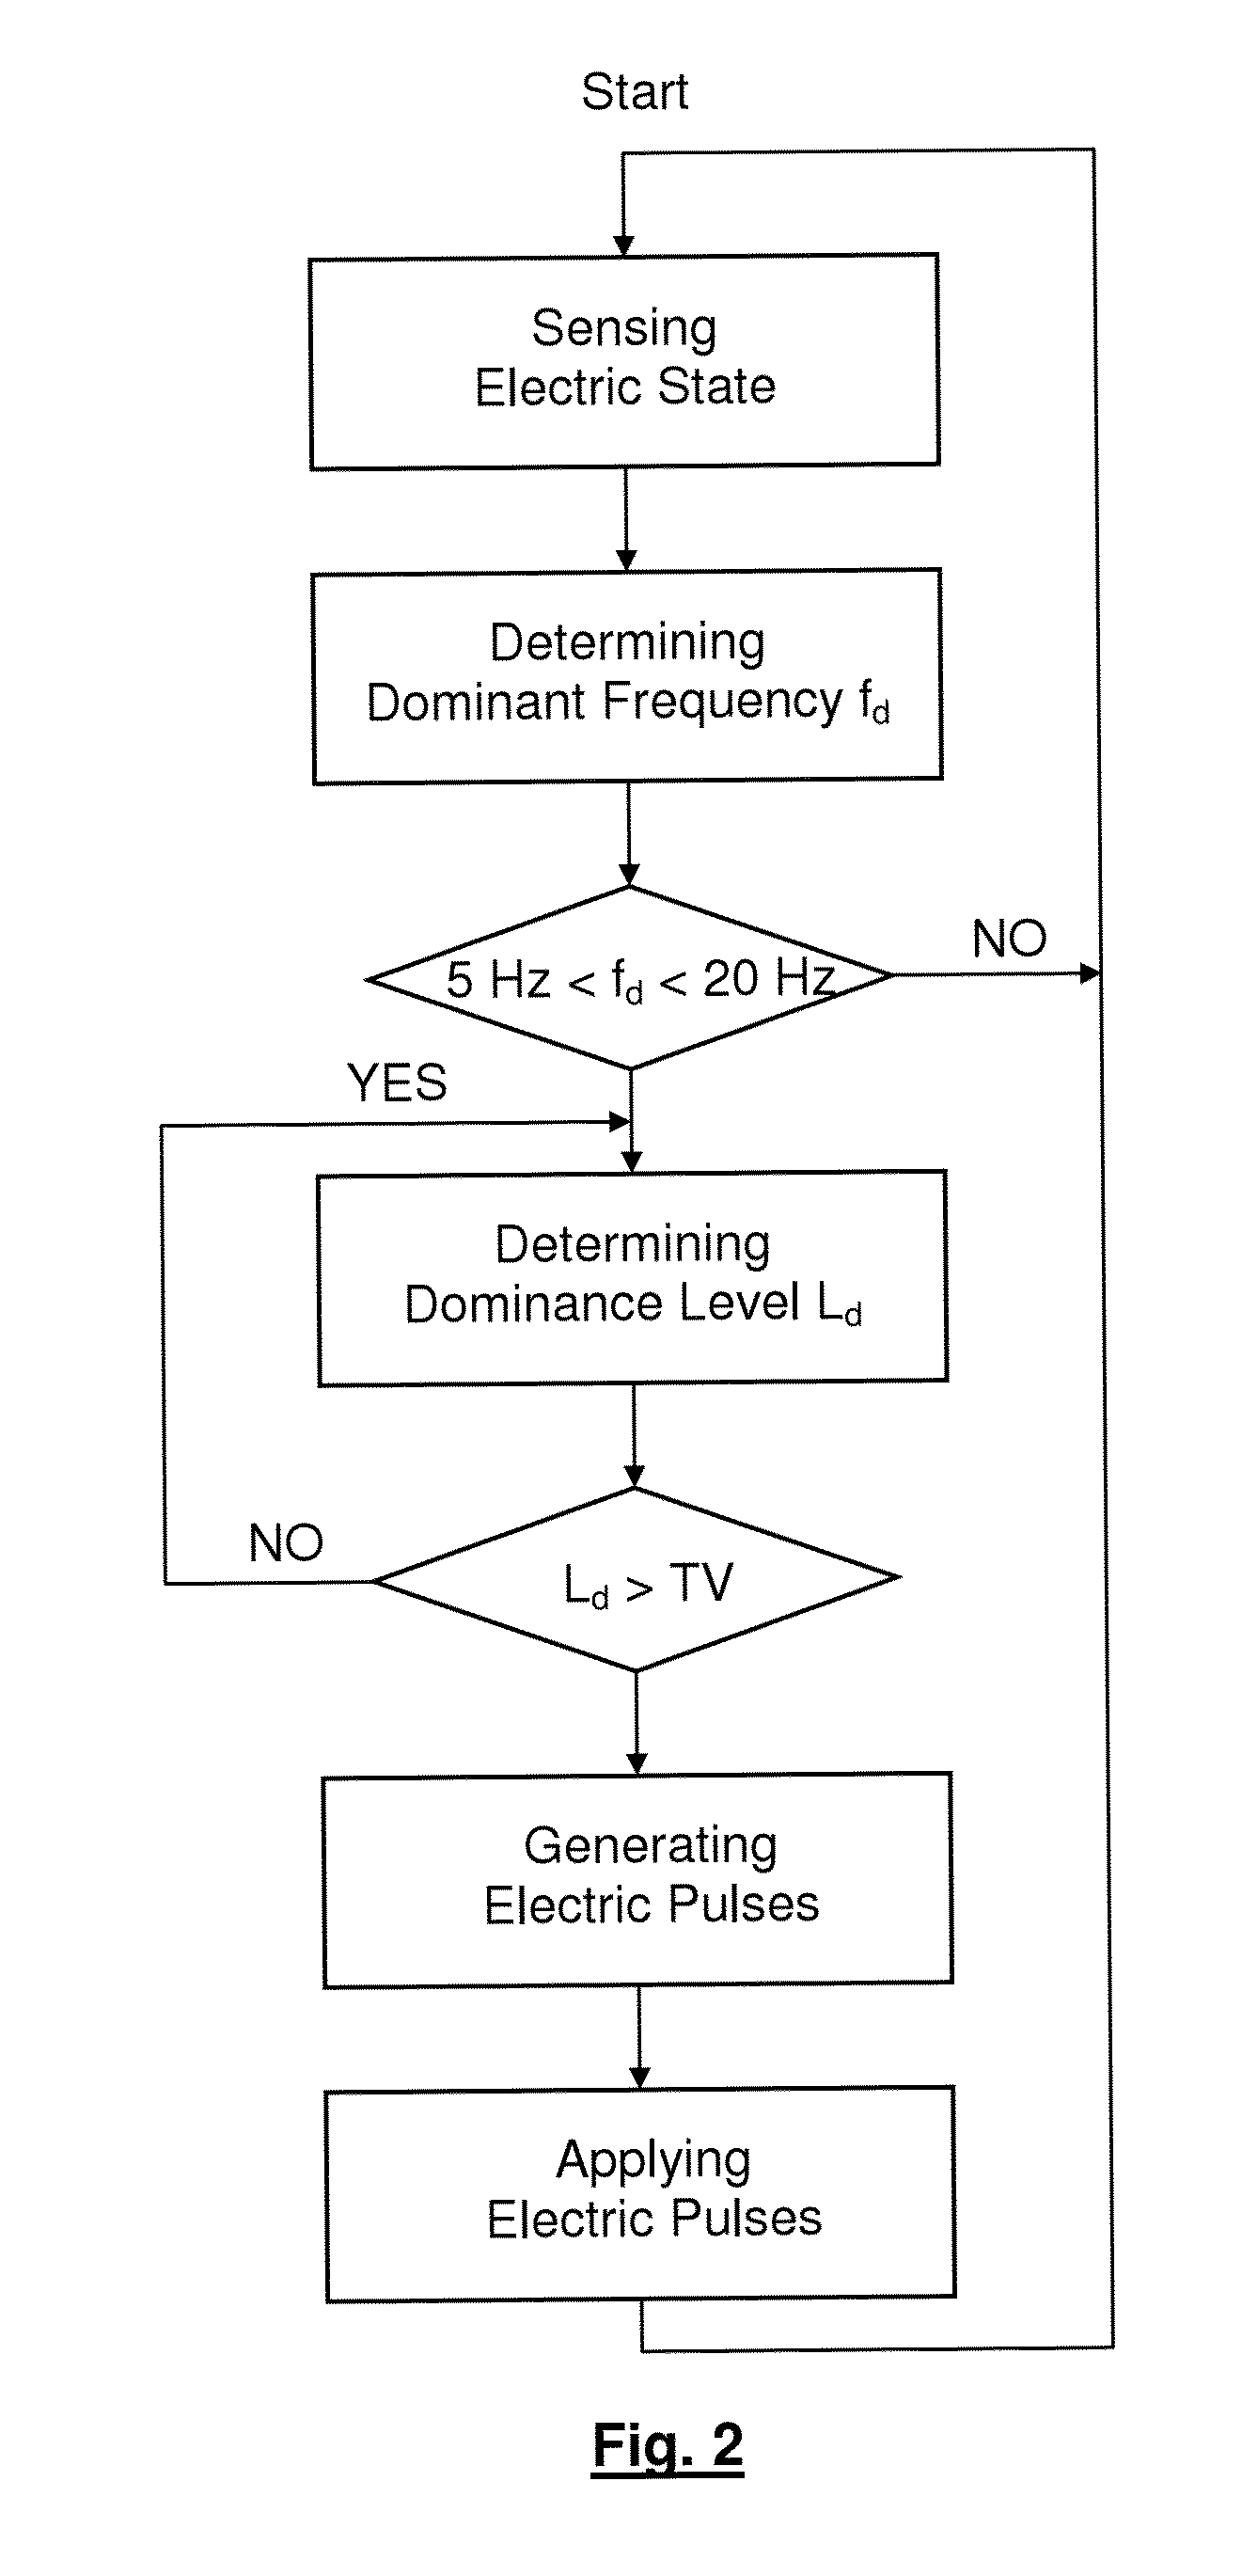 Apparatus for and method of terminating a high frequency arrhythmic electric state of a biological tissue